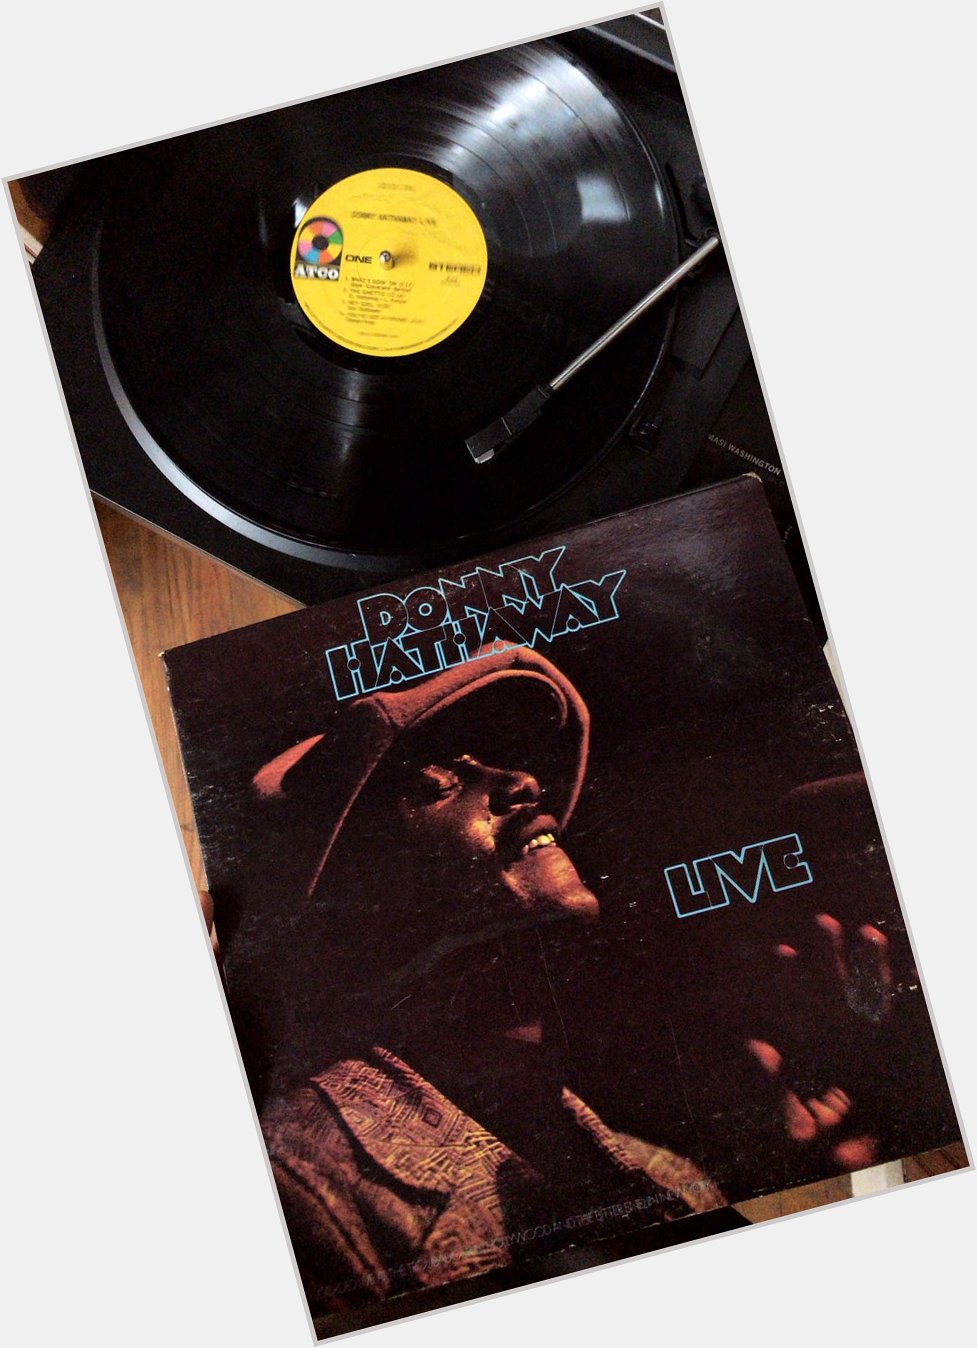 Happy Birthday, Donny Hathaway. Your music still stands strong. 